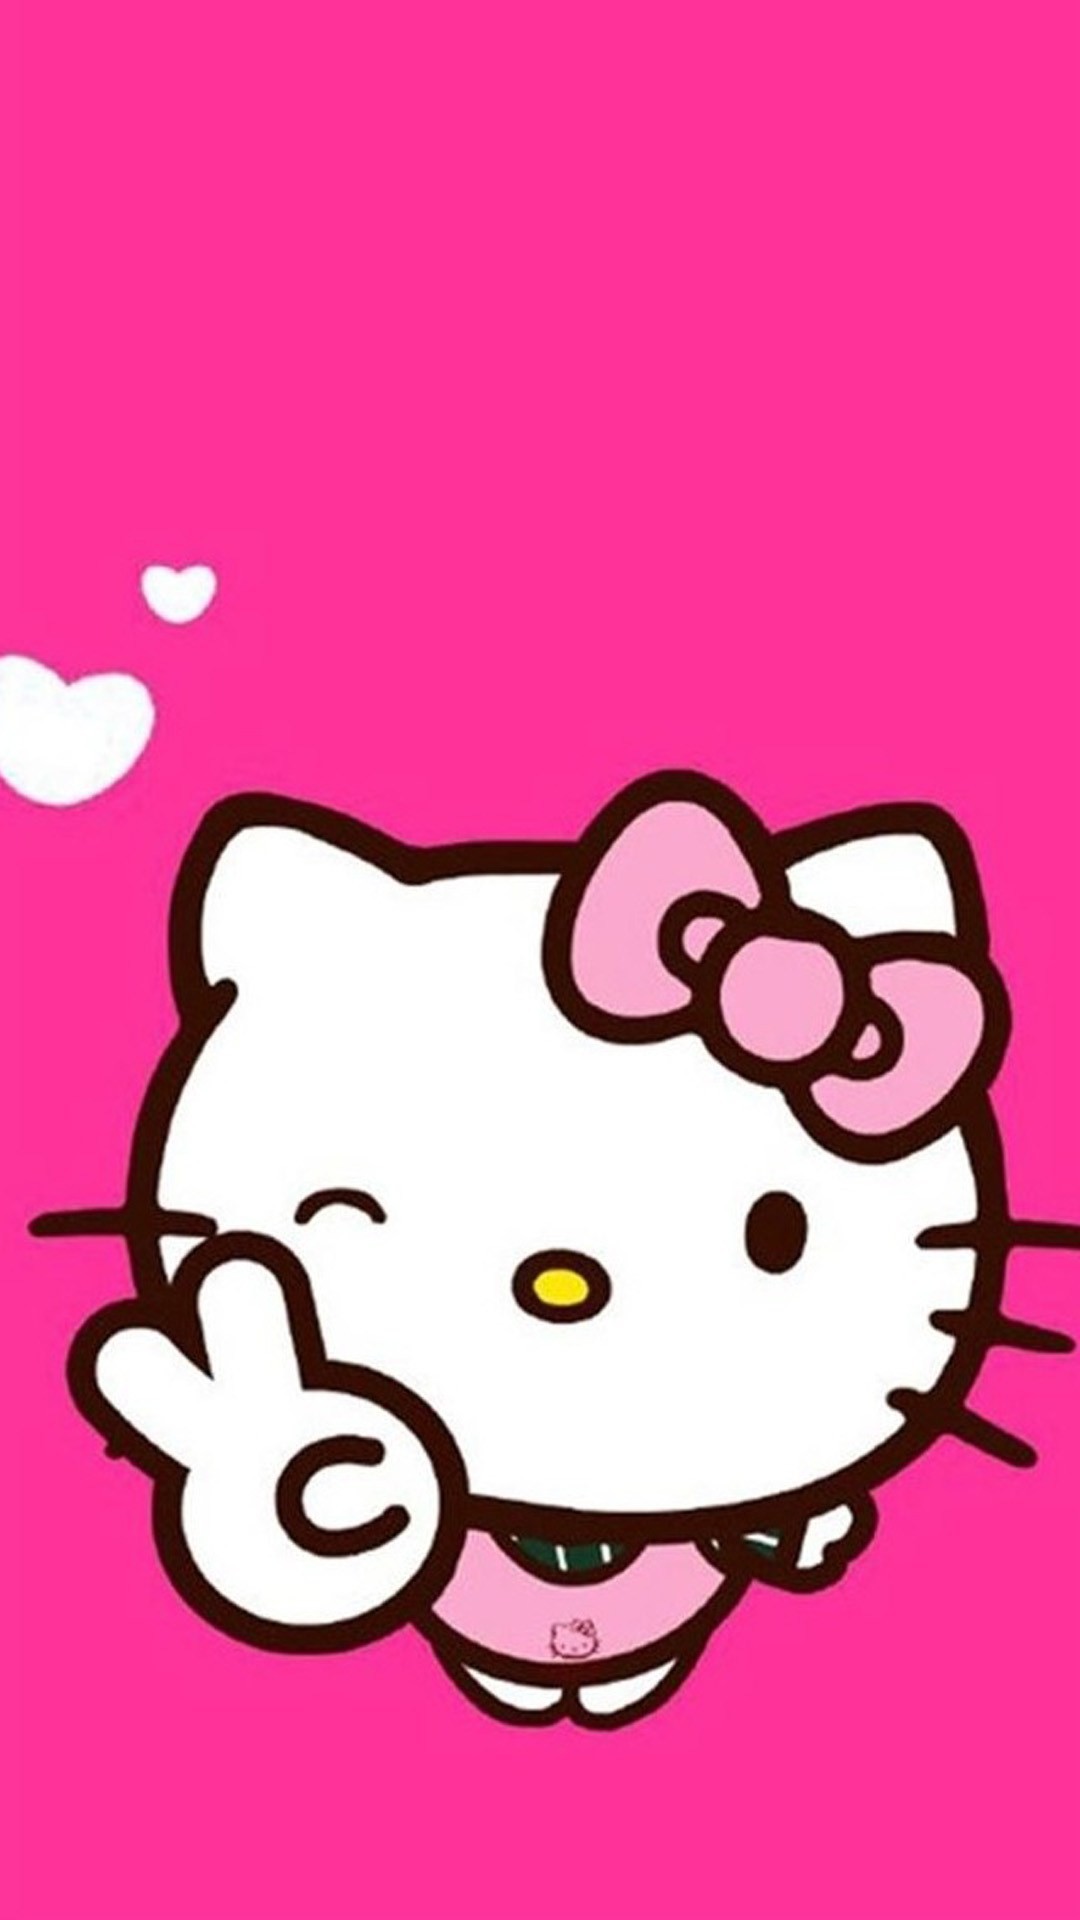 Cute wallpaper for Whatsapp featuring Hello Kitty in pink